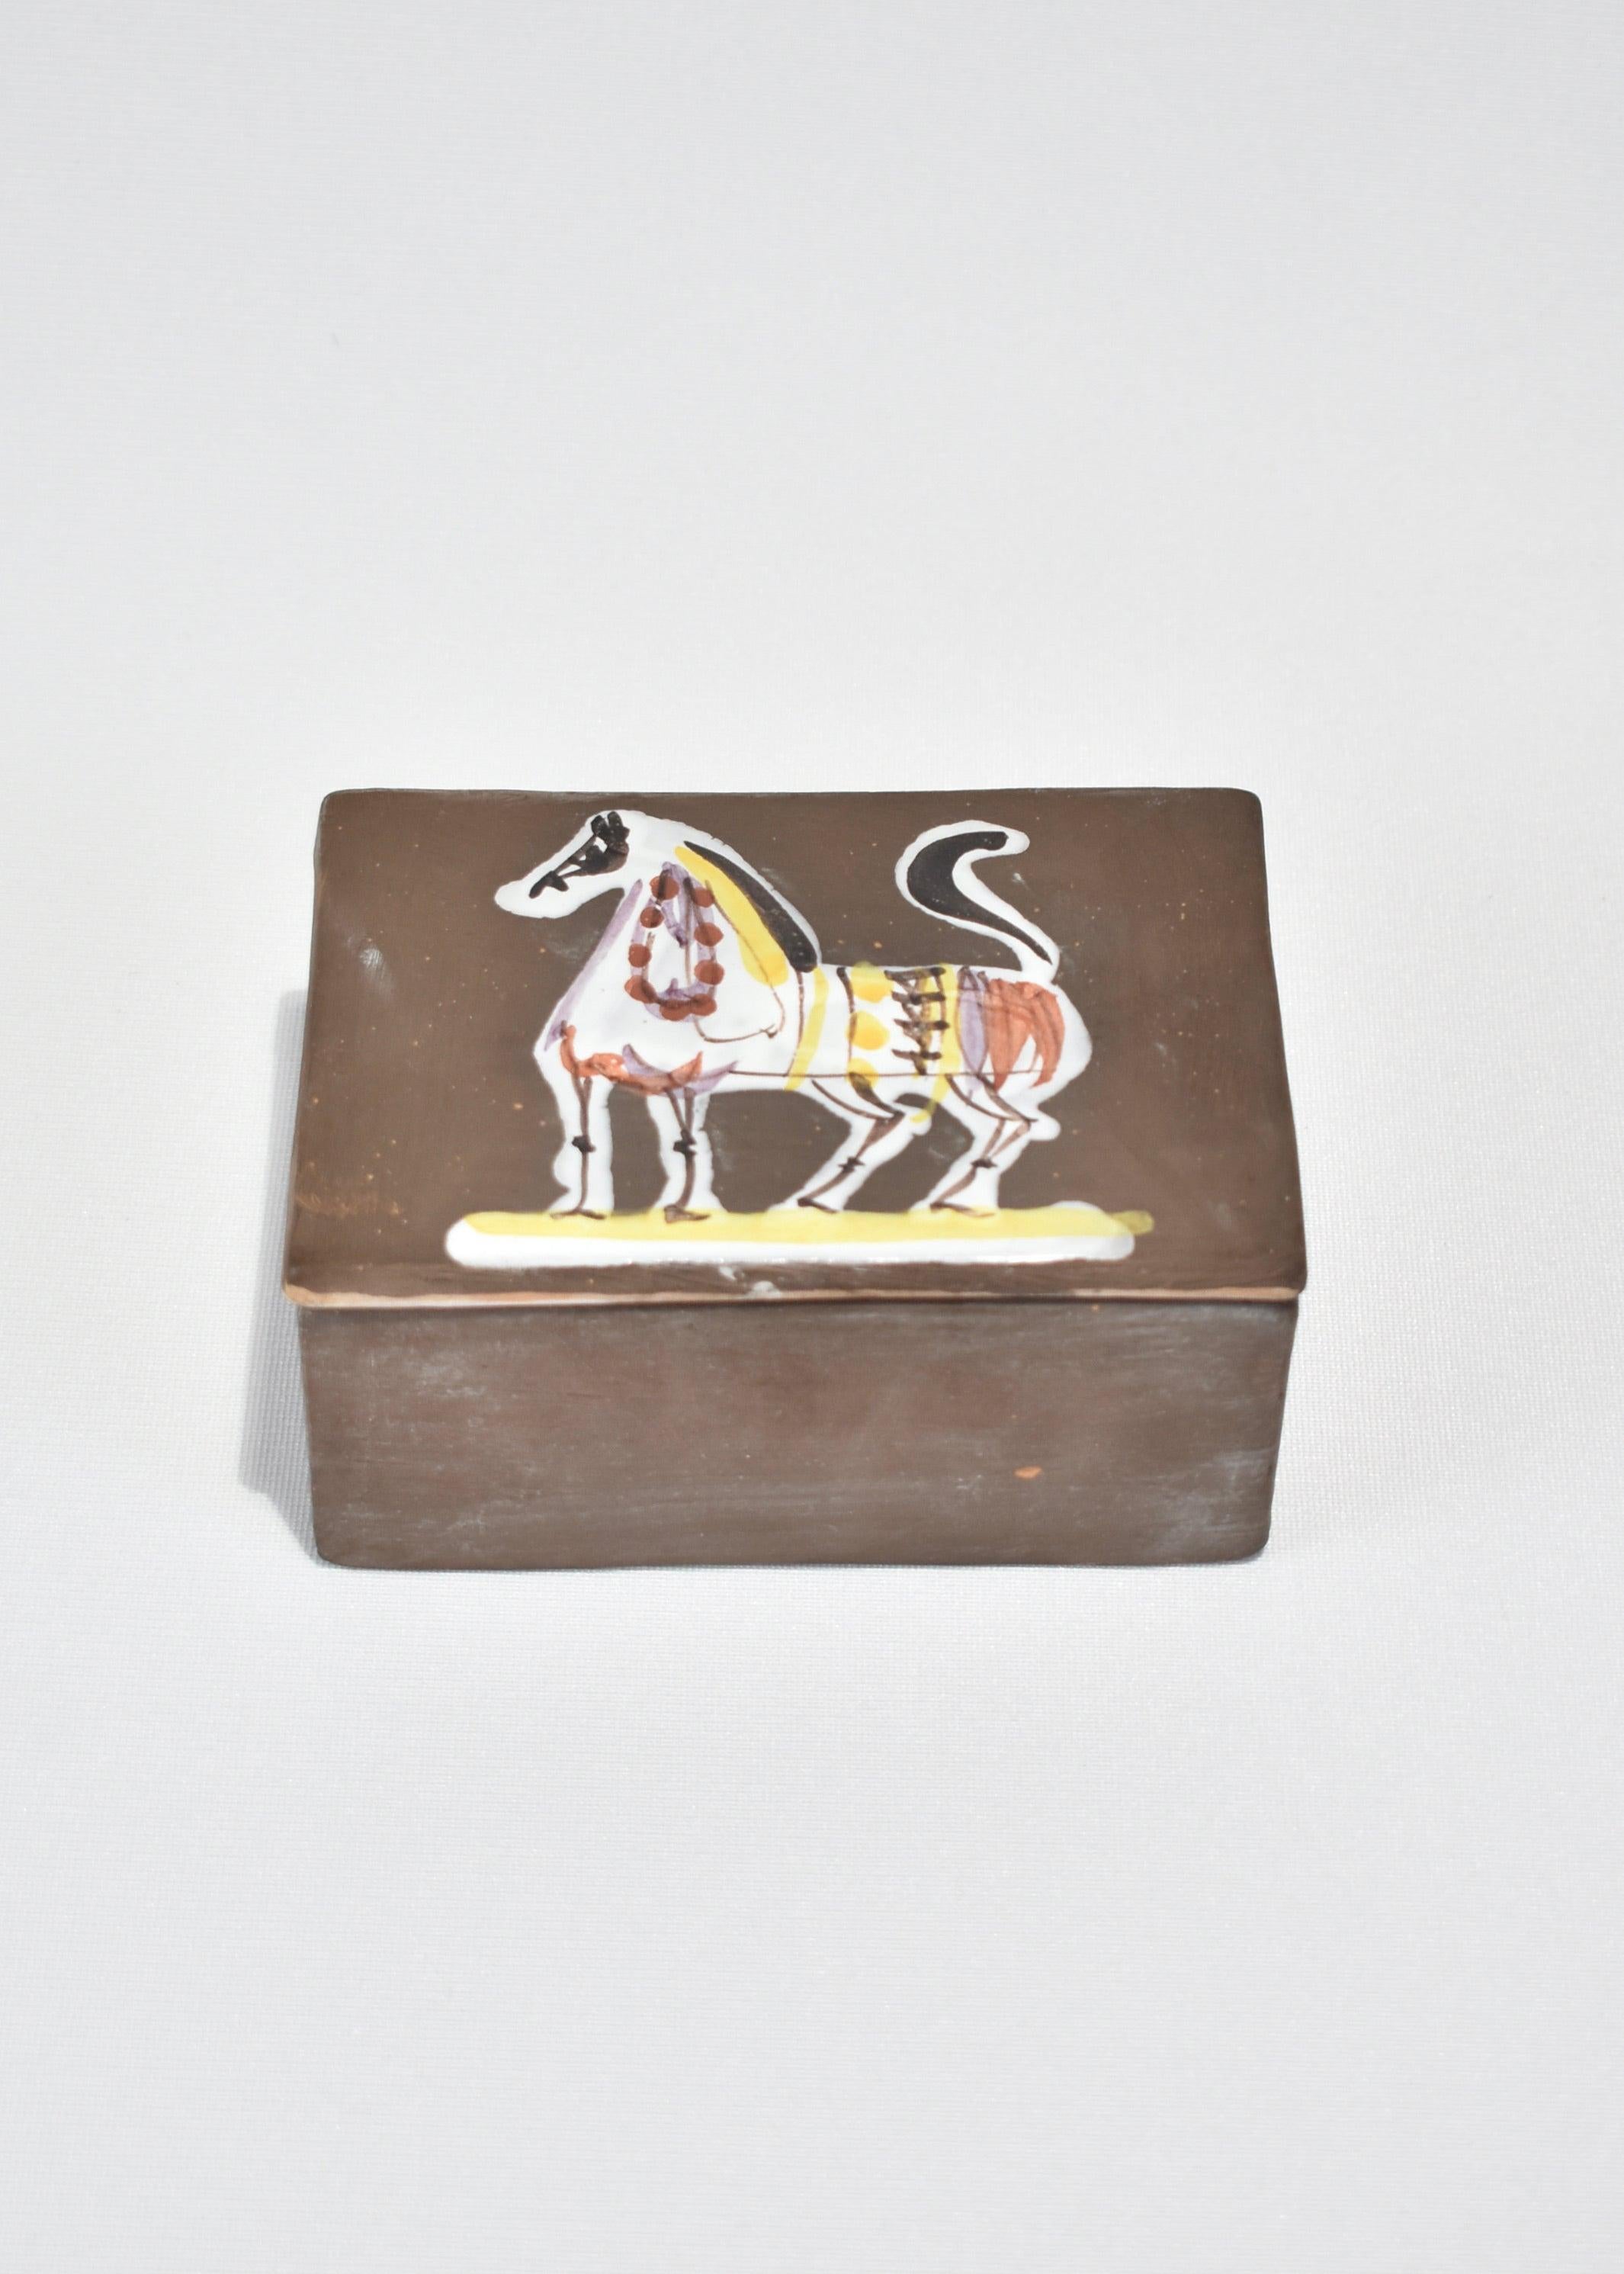 Vintage ceramic box with painted horse motif? Made in Italy.